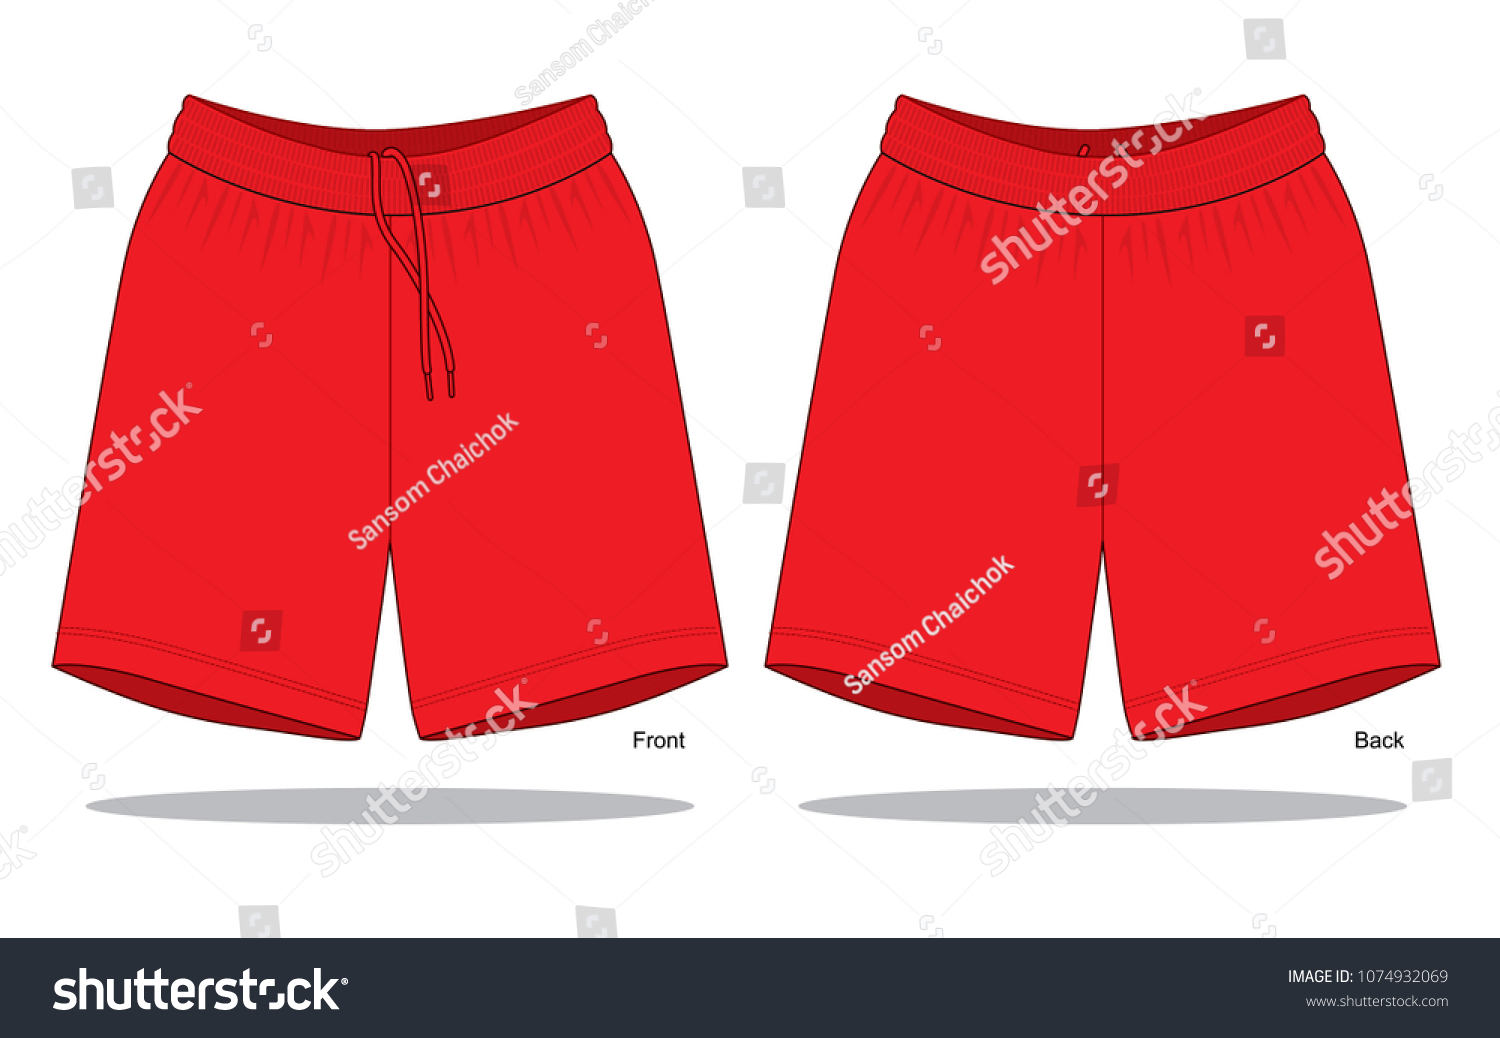 17,538 Boy red shorts Images, Stock Photos & Vectors | Shutterstock